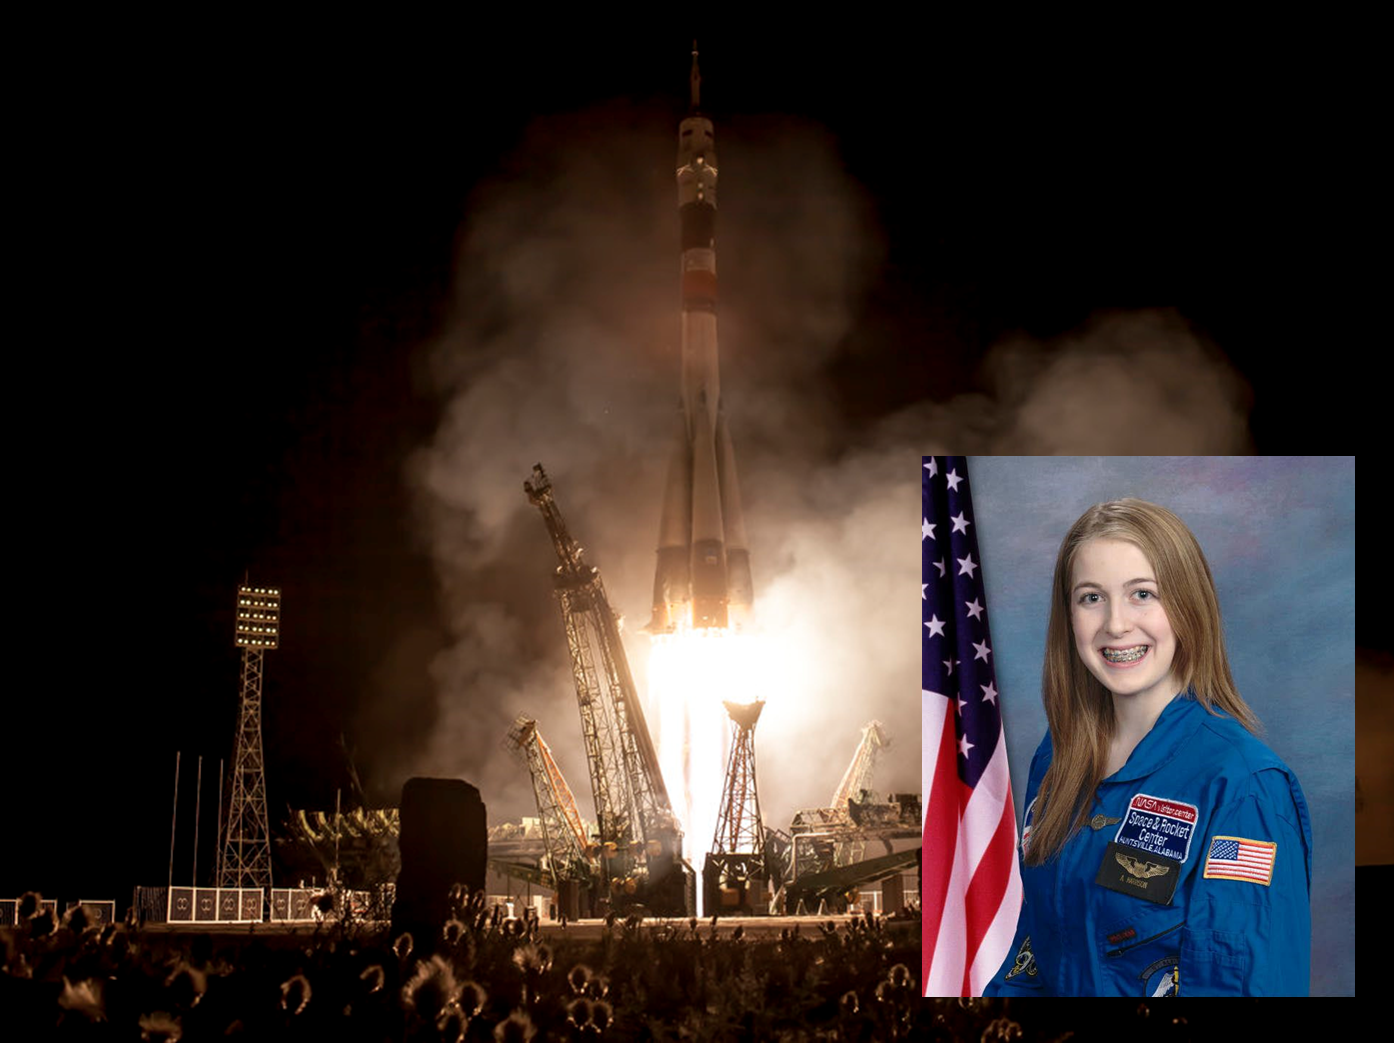 Astronaut Abby attended the launch of the Expedition 36 crew to the International Space Station ISS Image credit NASA & Astronaut Abby's Facebook page posted on AmericaSpace with permission